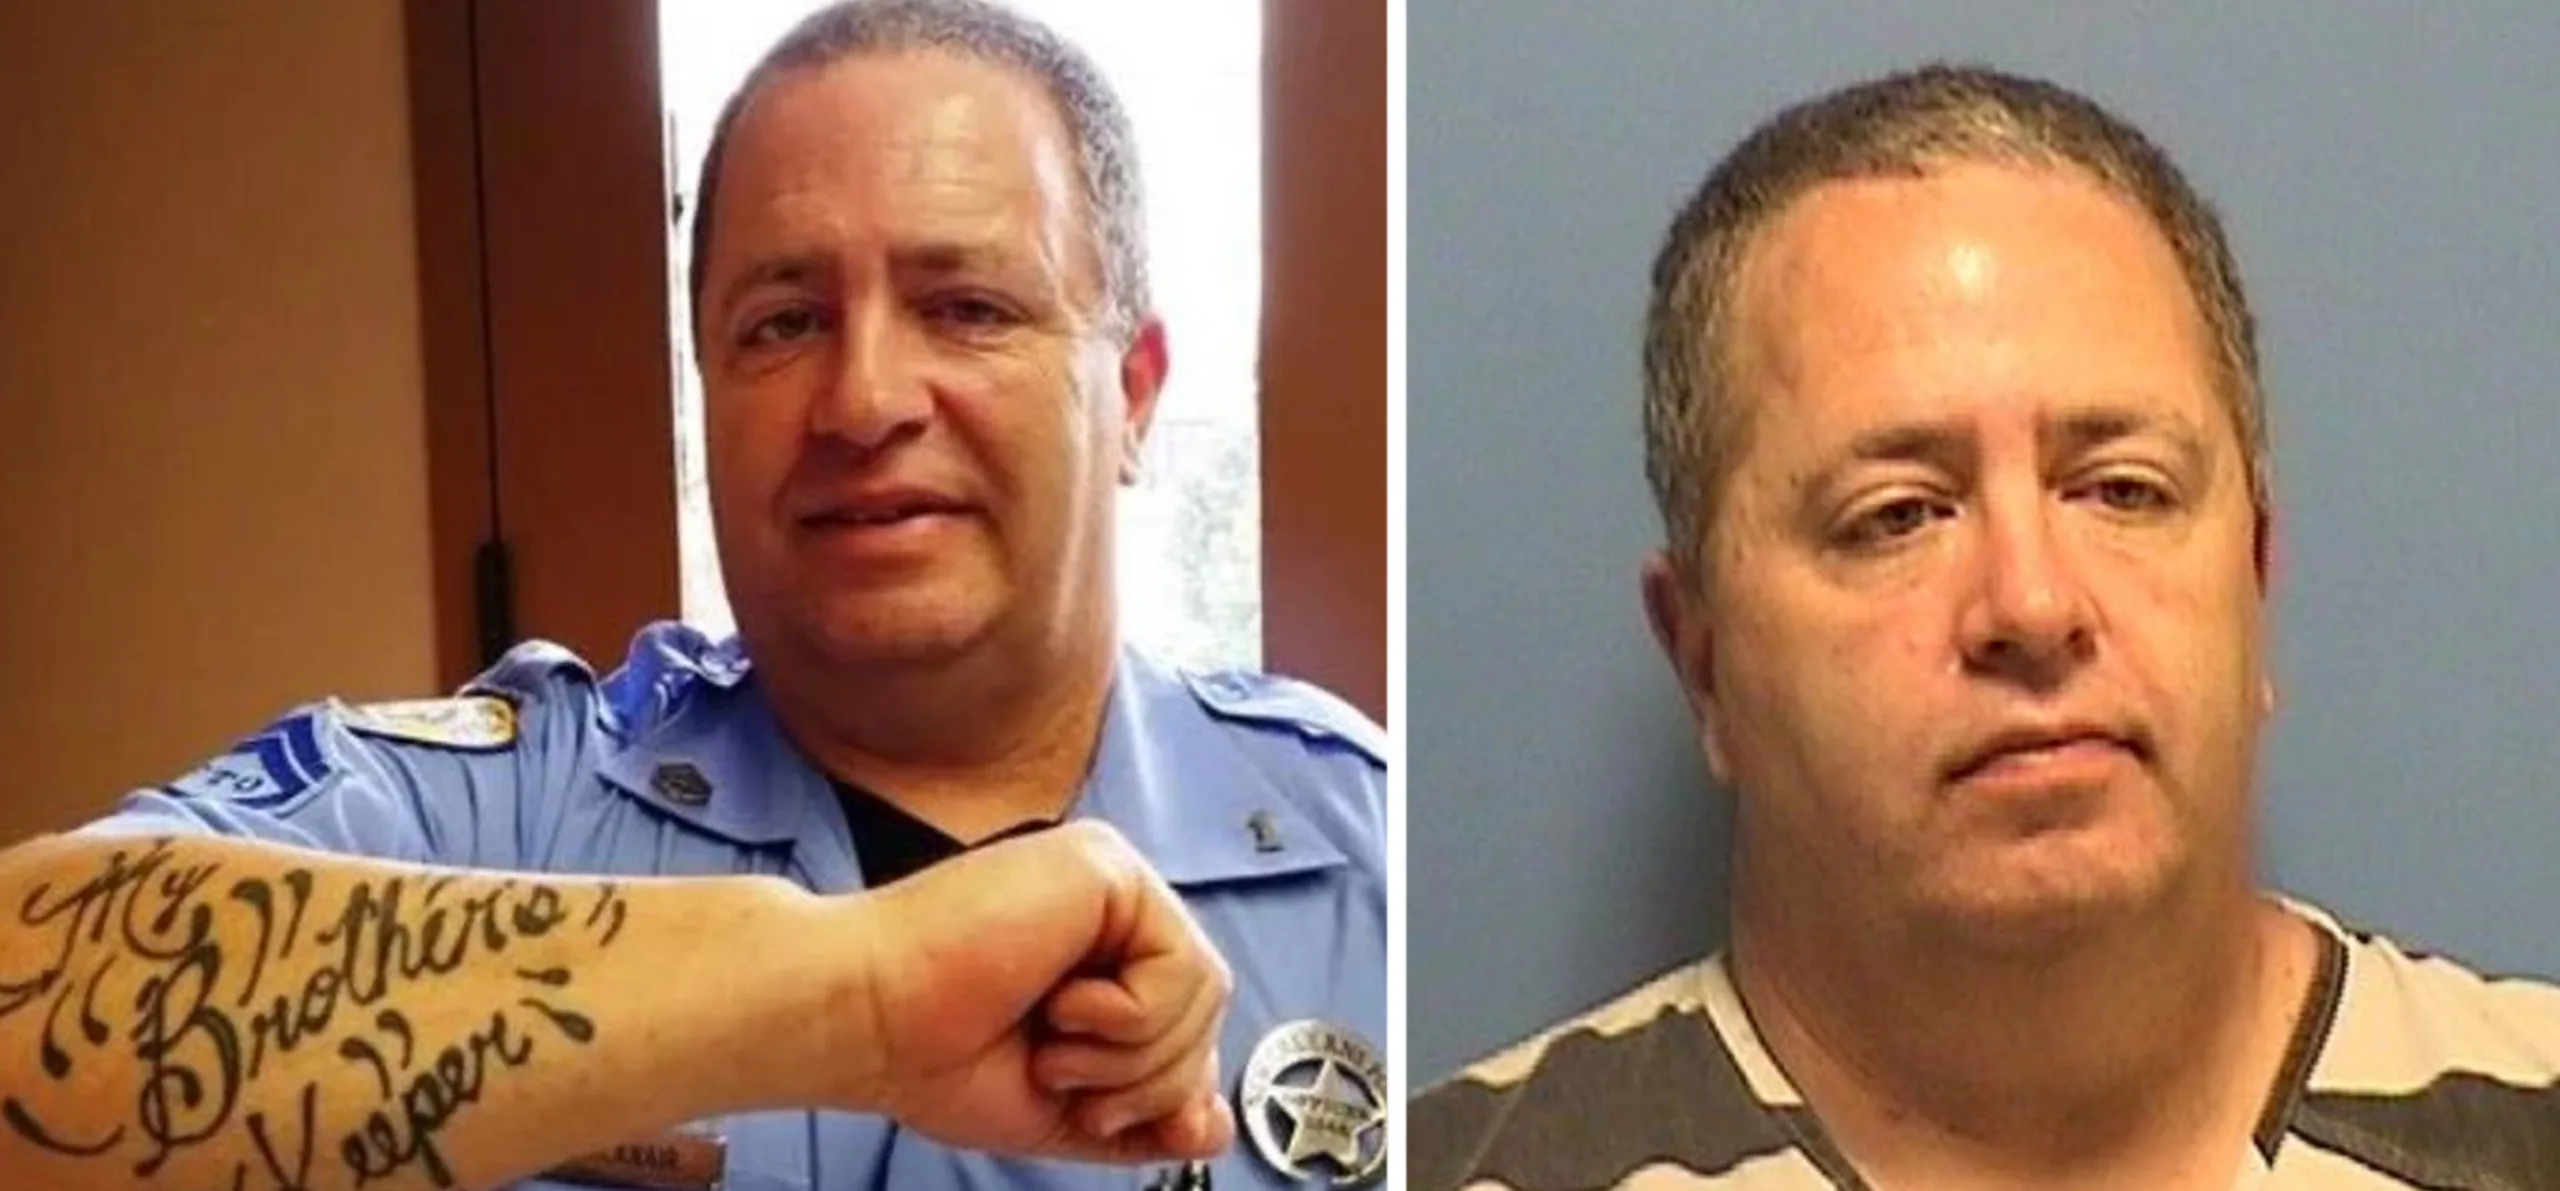 Cop Admits to Responding to Child Rape Case by Raping 14 Year Old Victim Himself